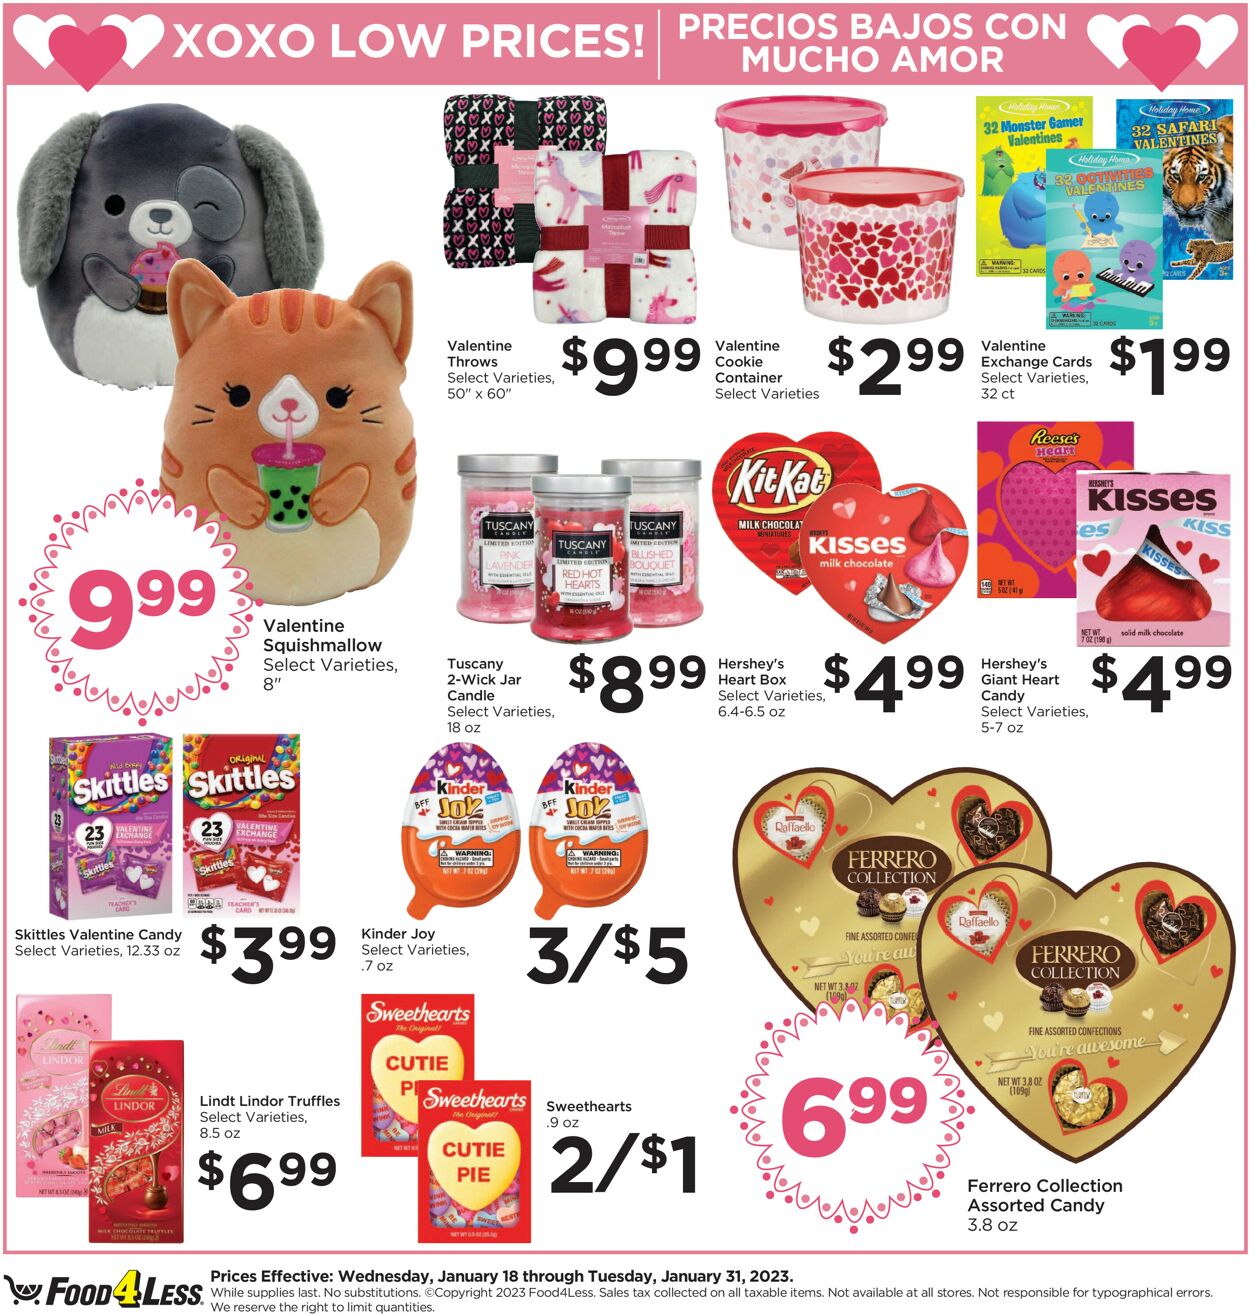 Food 4 Less Ad from 01/25/2023